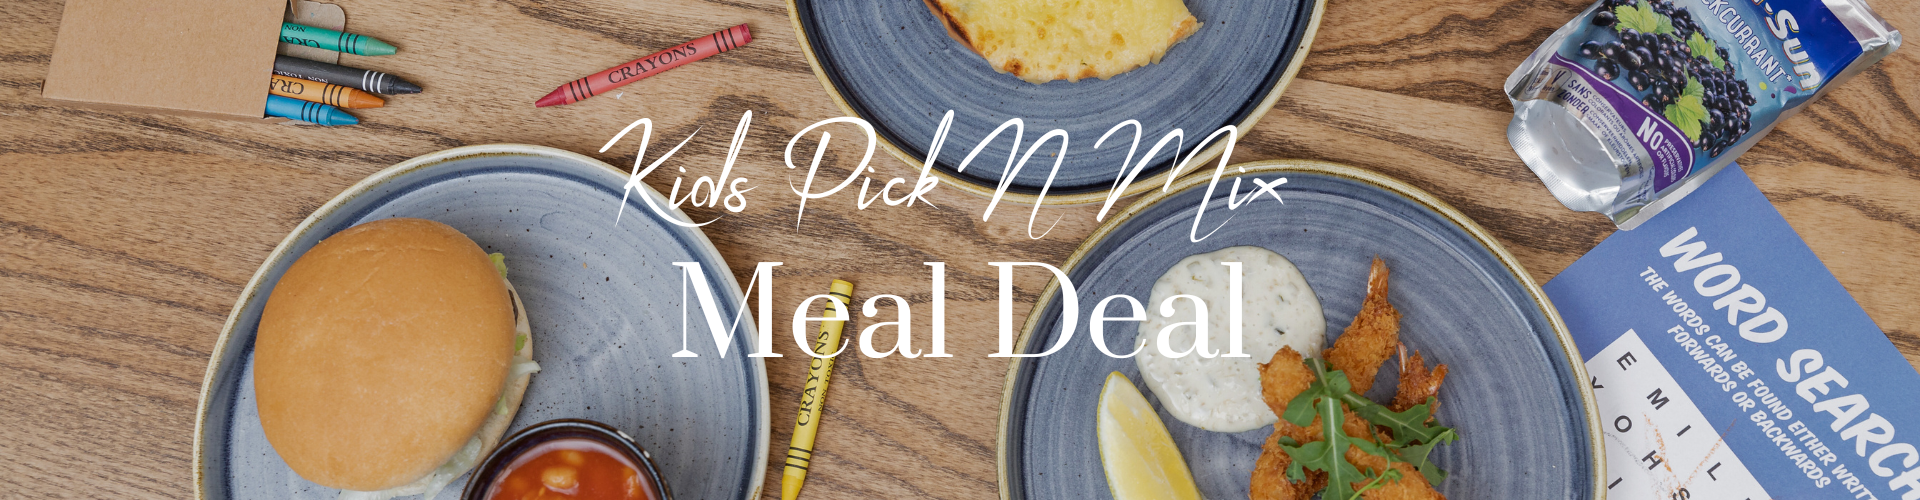 Kids Meal Deal available at Red Lion